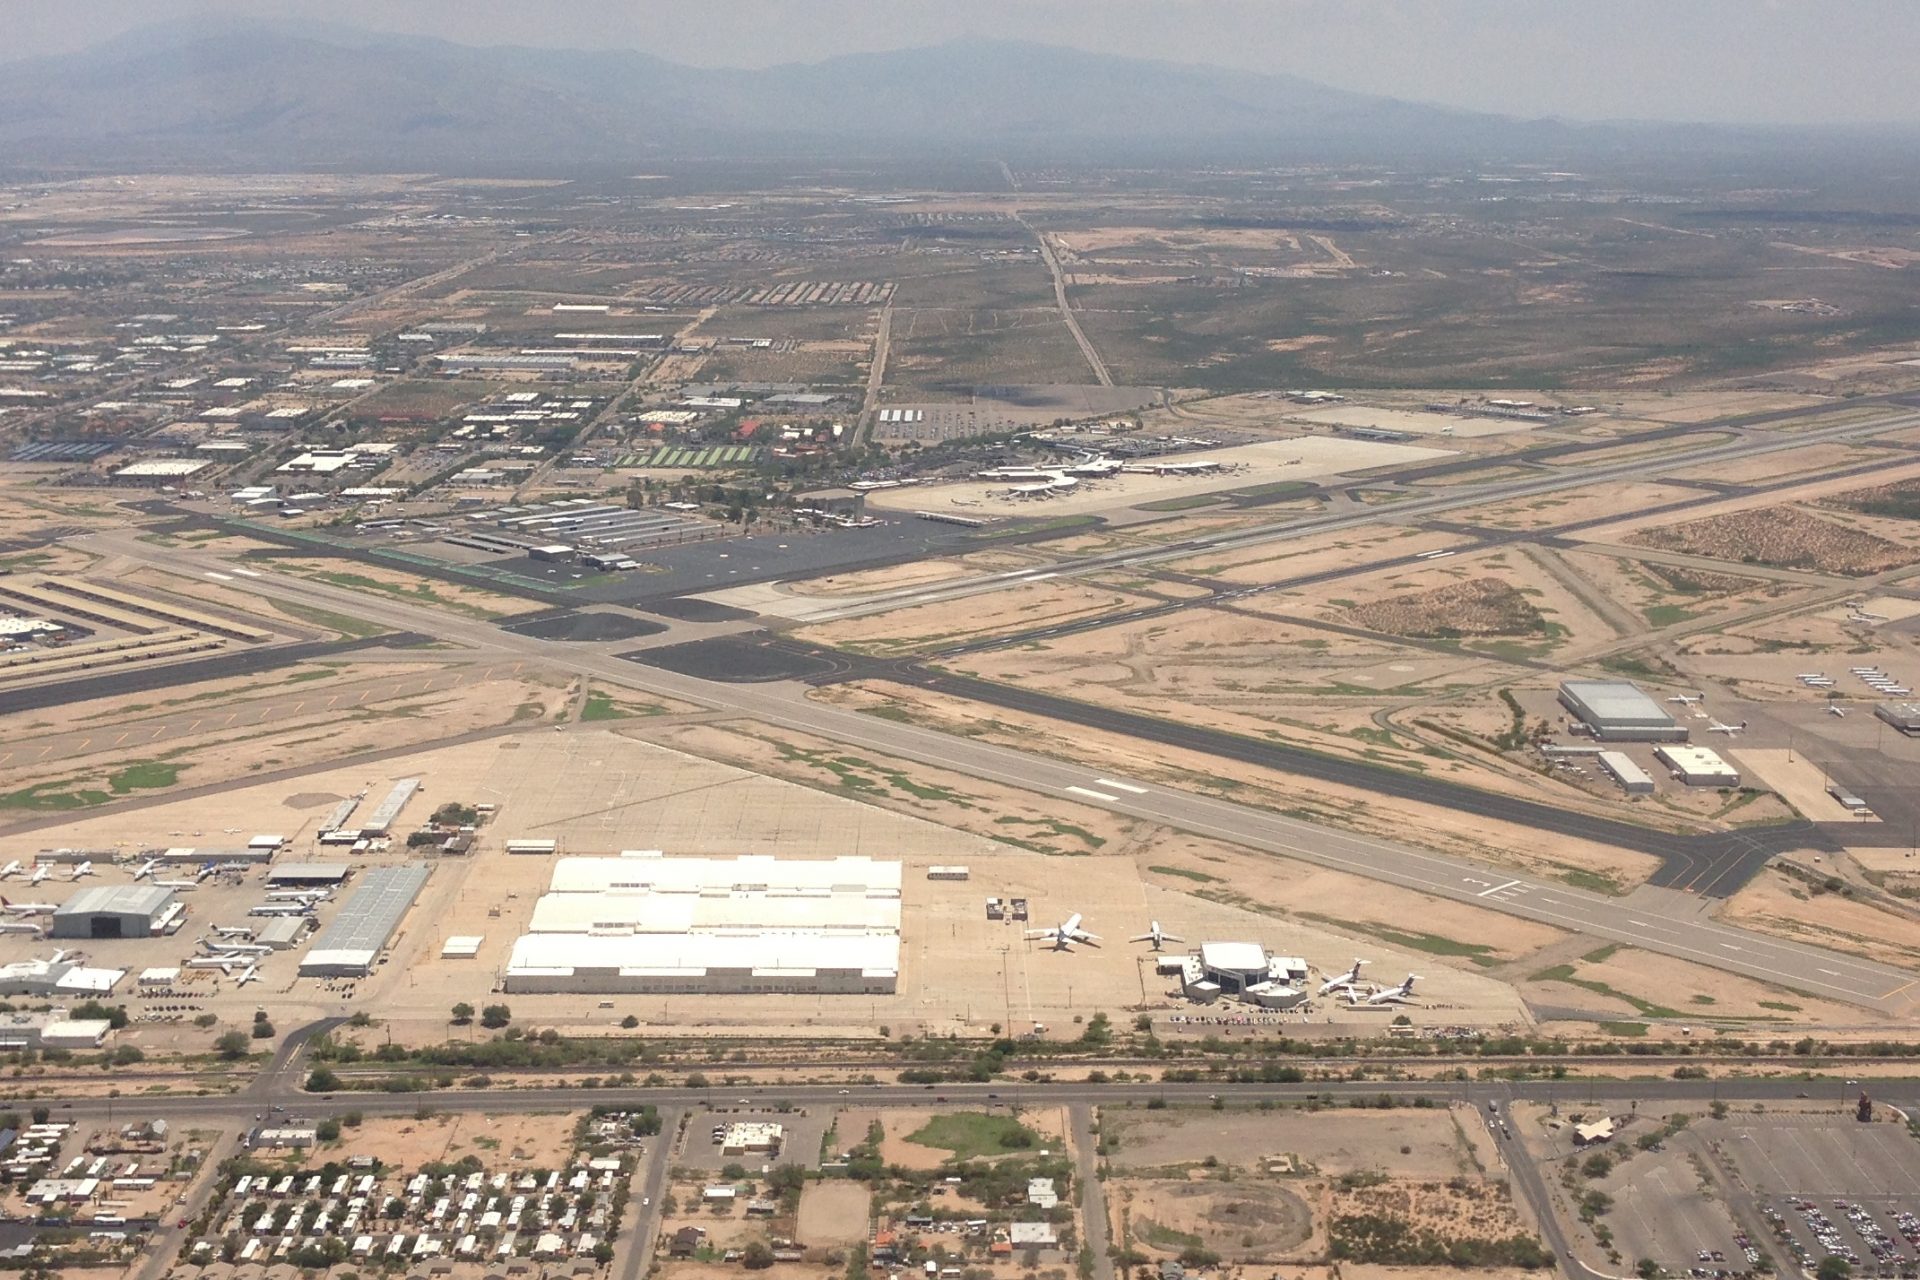 Operating out of Tucson